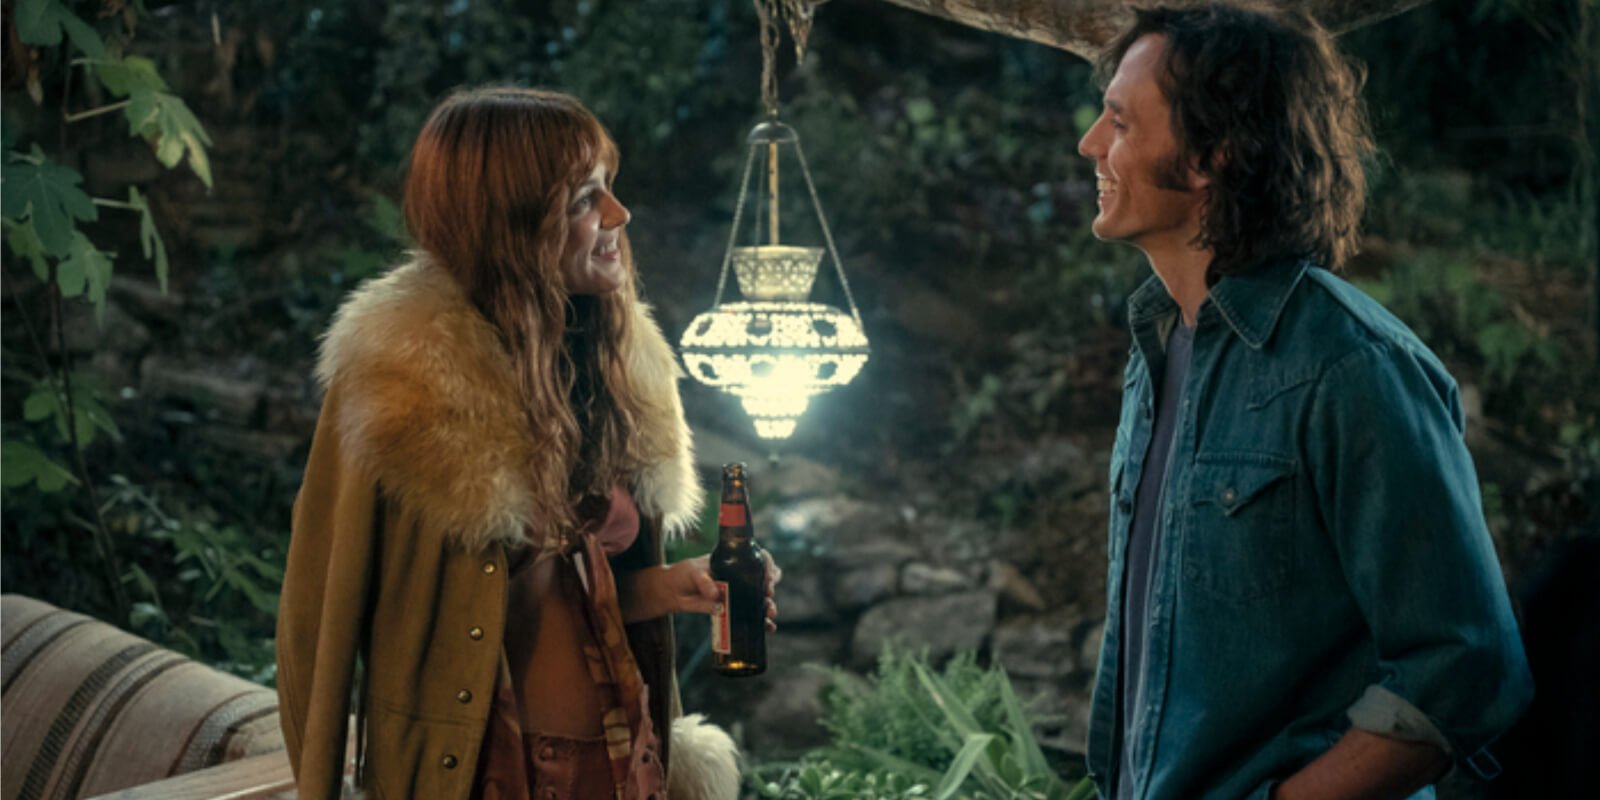 Riley Keough wears a coat made by Elvis Presley's designer in the film 'Daisy Jones & The Six' with Sam Claflin.